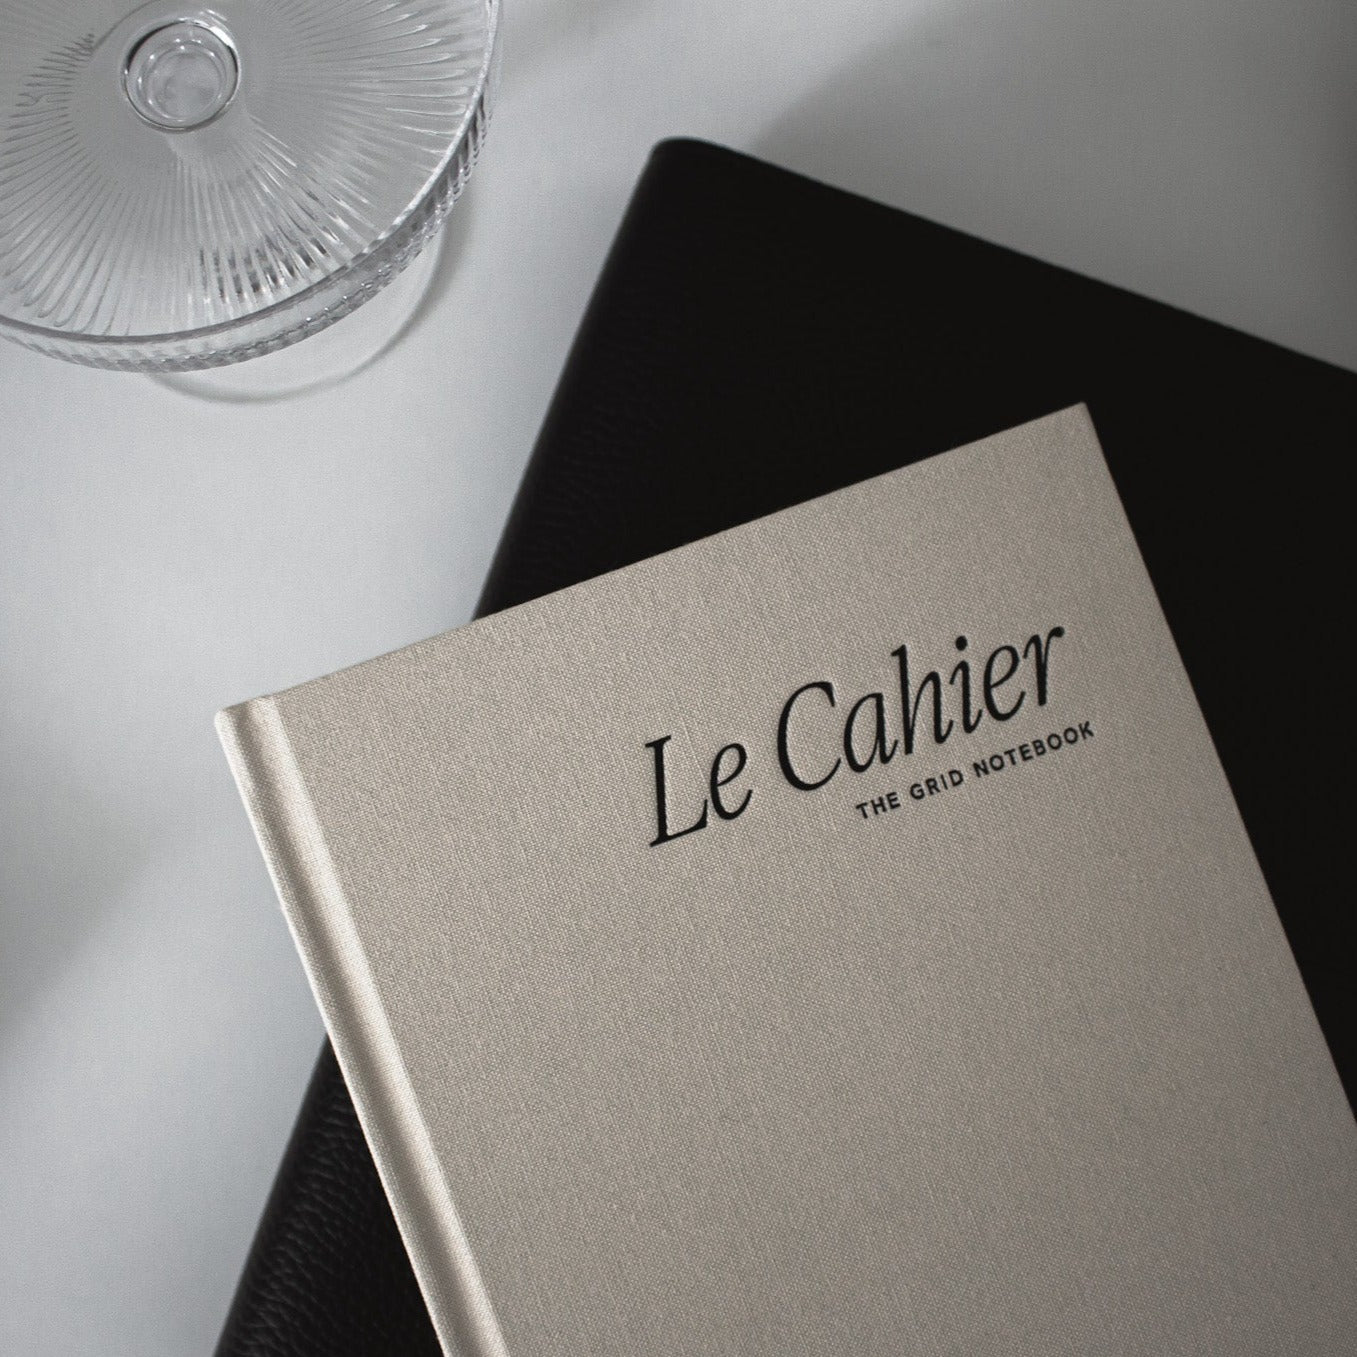 Le Cahier : The Grid Notebook